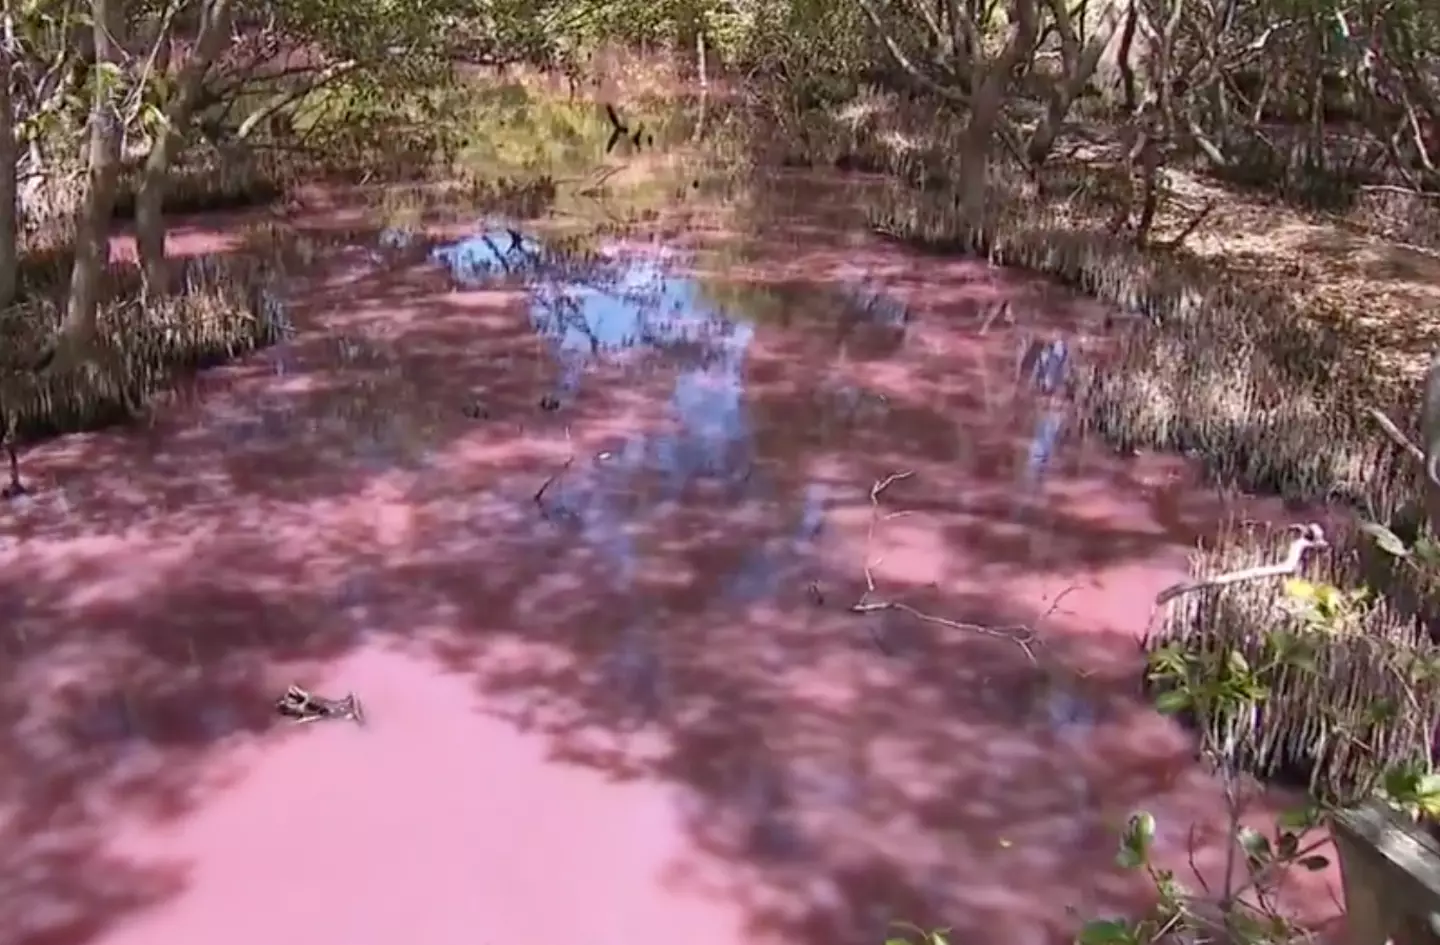 The water turned pink due to algae.